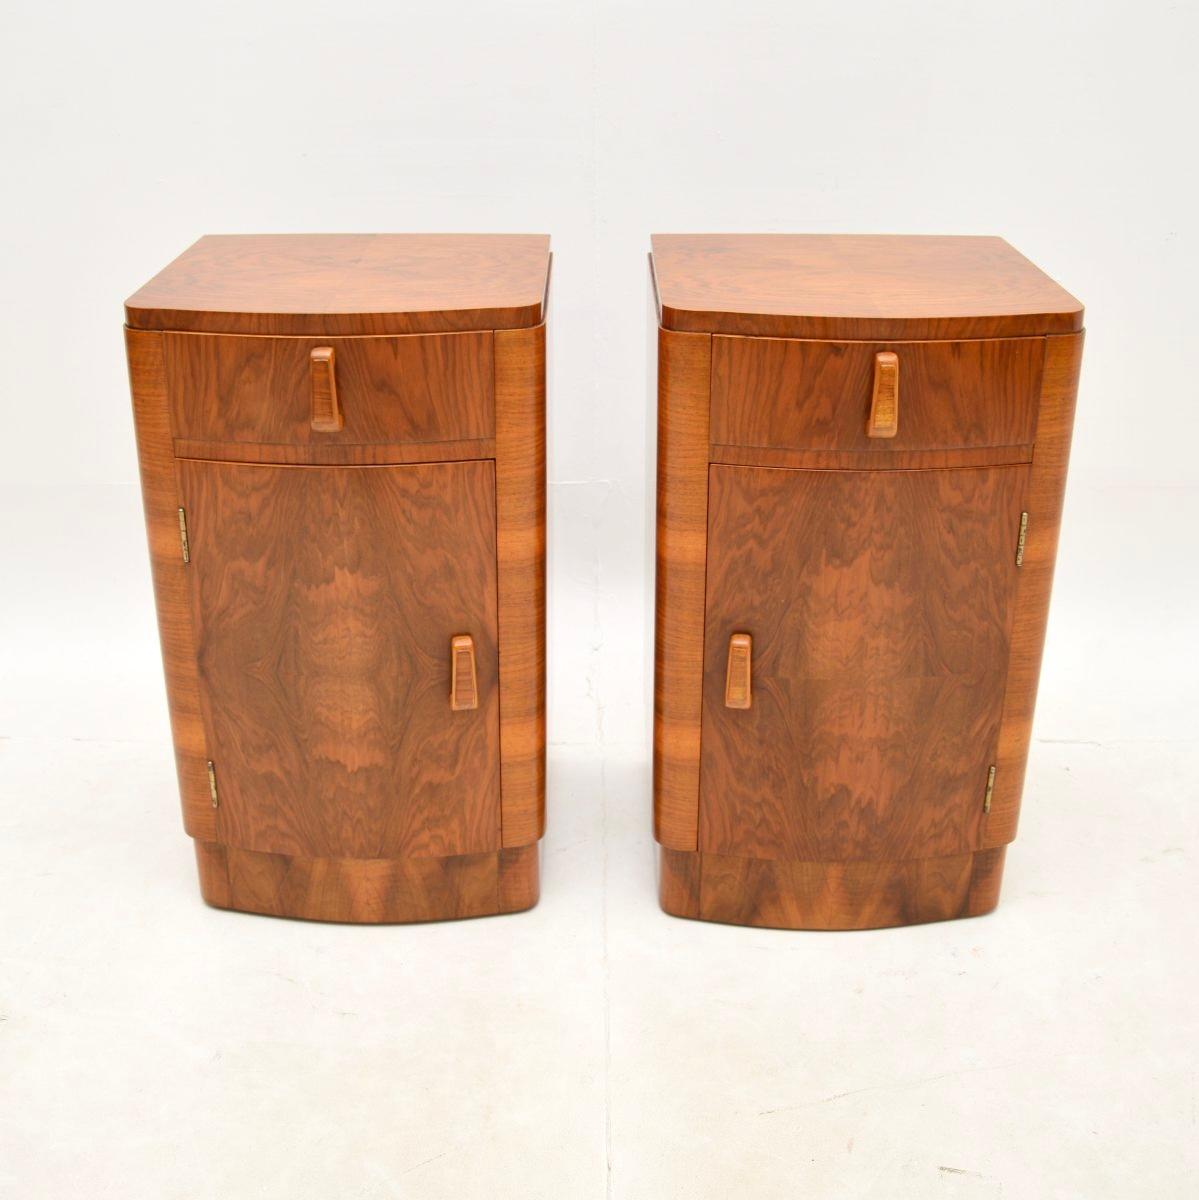 A beautifully made pair of Art Deco walnut bedside cabinets. They were made in England, they date from the 1930’s.

Made from richly figured walnut, the colour and grain patterns are lovely. They are a very useful size and offer ample storage, each